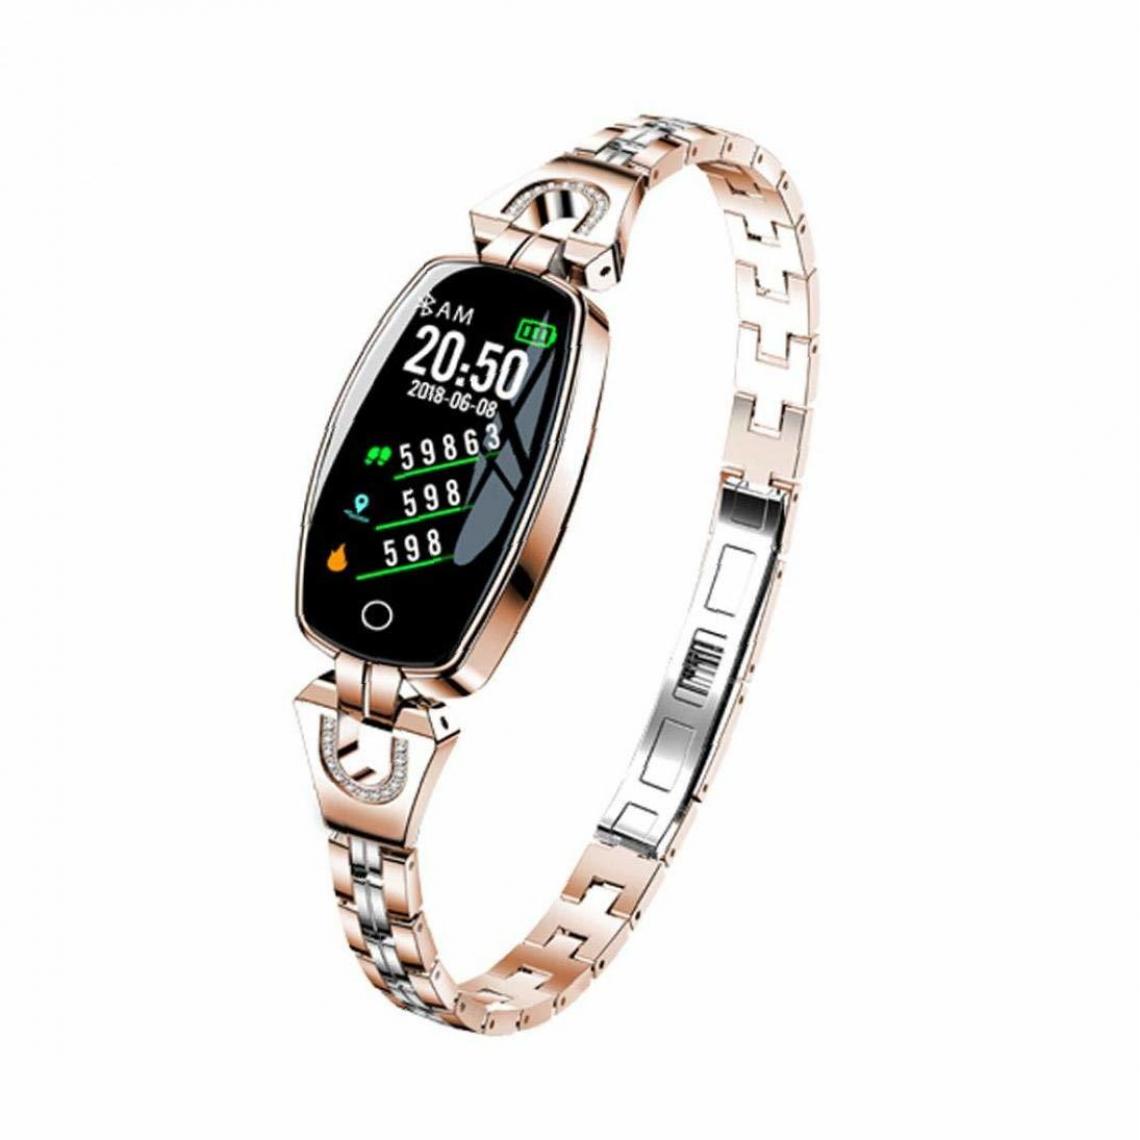 Chronotech Montres - Chronus Women's Smart Watch H8, Waterproof, Blood Pressure Sleep Detection, For Android IOS (gold) - Montre connectée